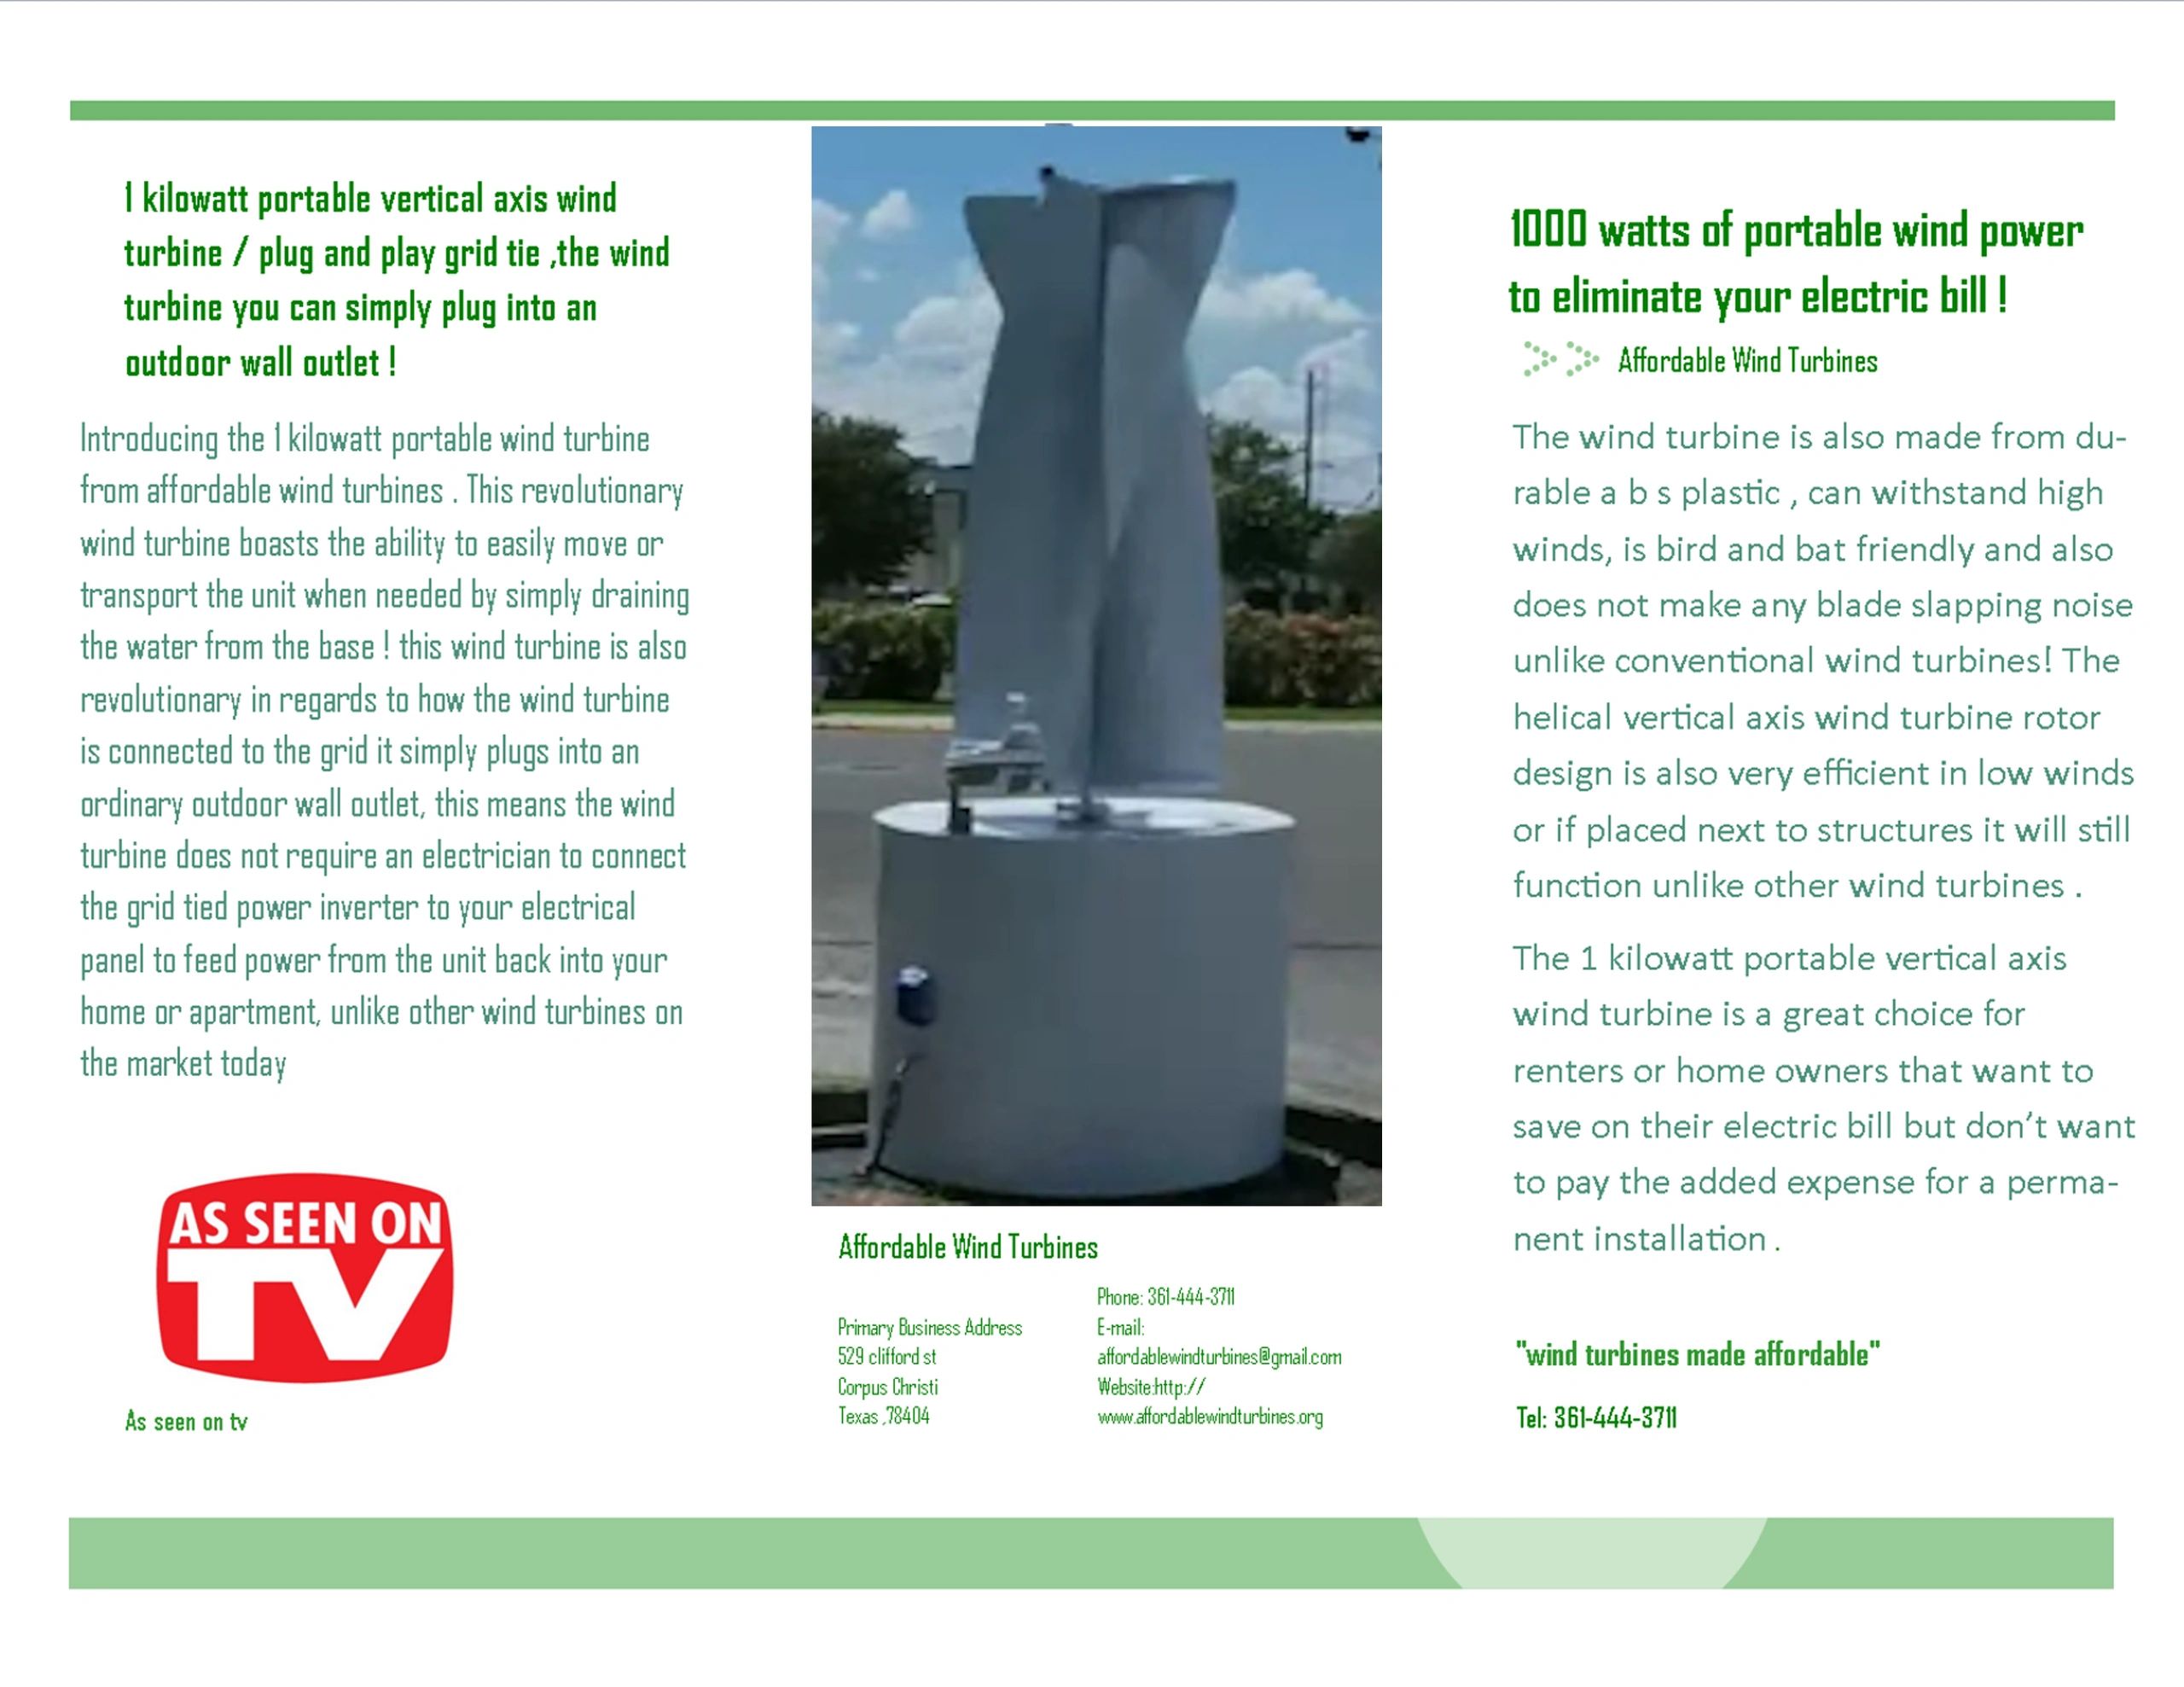 A wind turbine manufacturer that builds a wind turbine power that plugs into home wall outlet